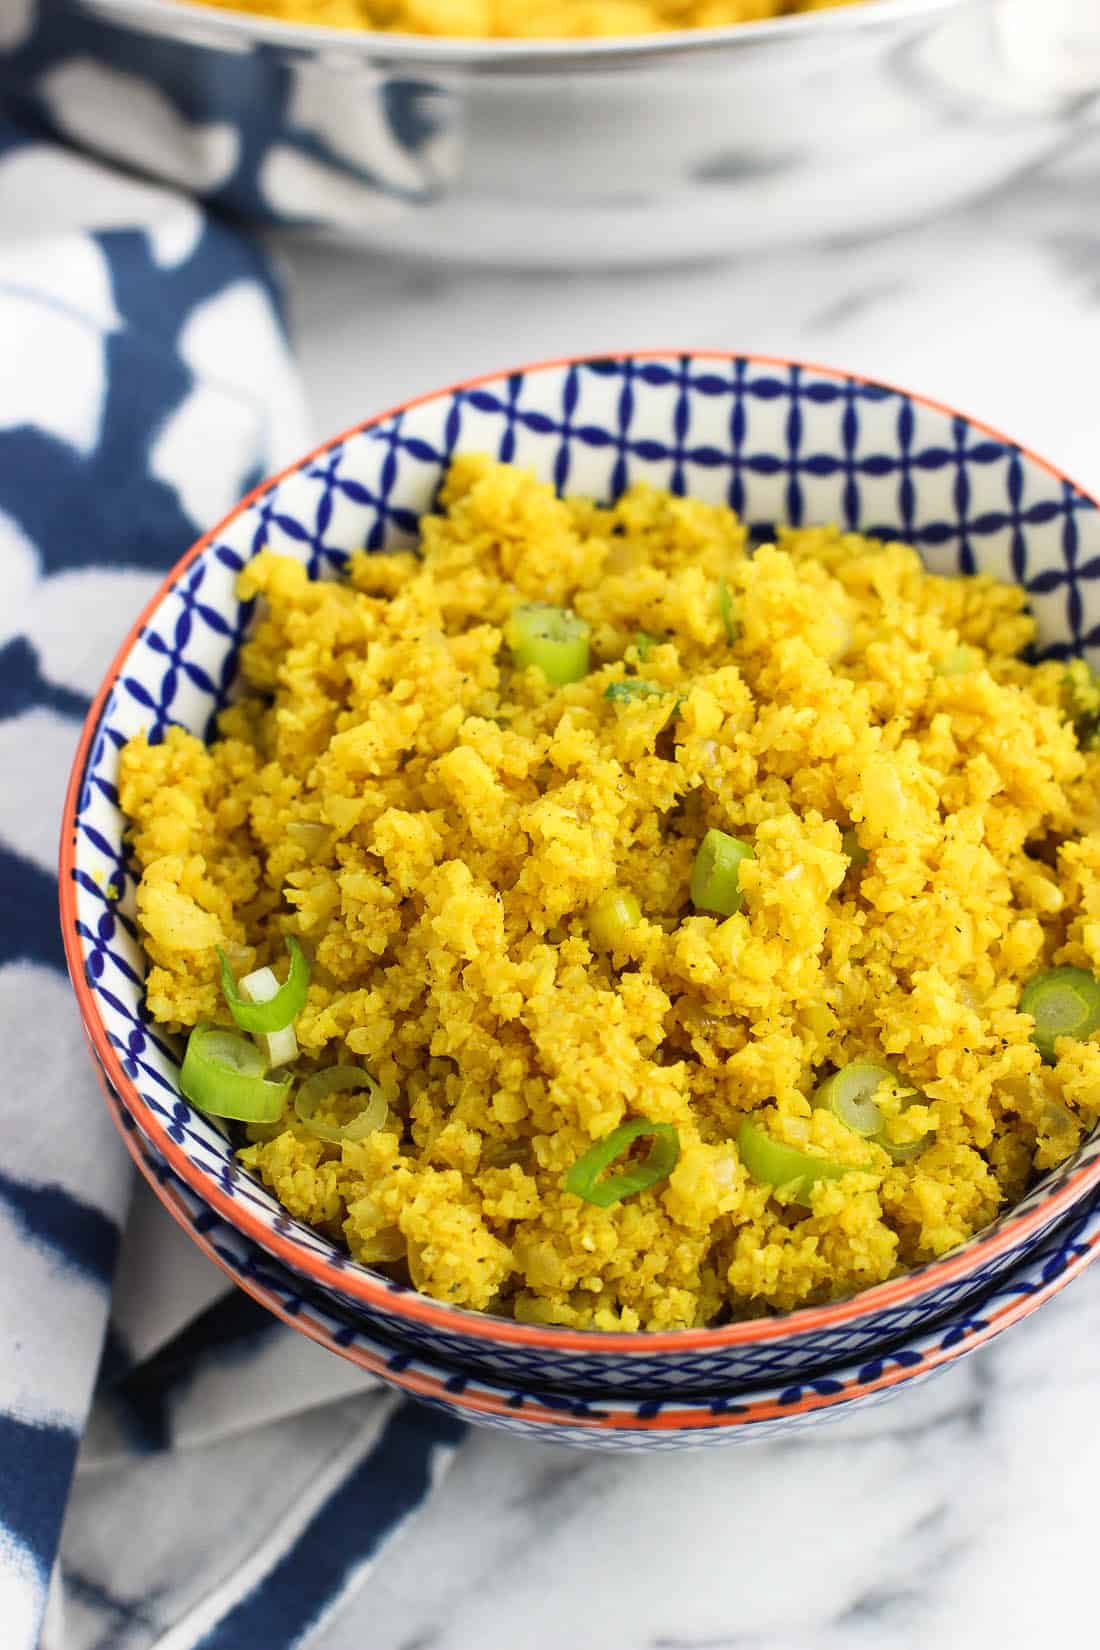 A serving of turmeric cauliflower rice in a small ceramic bowl.